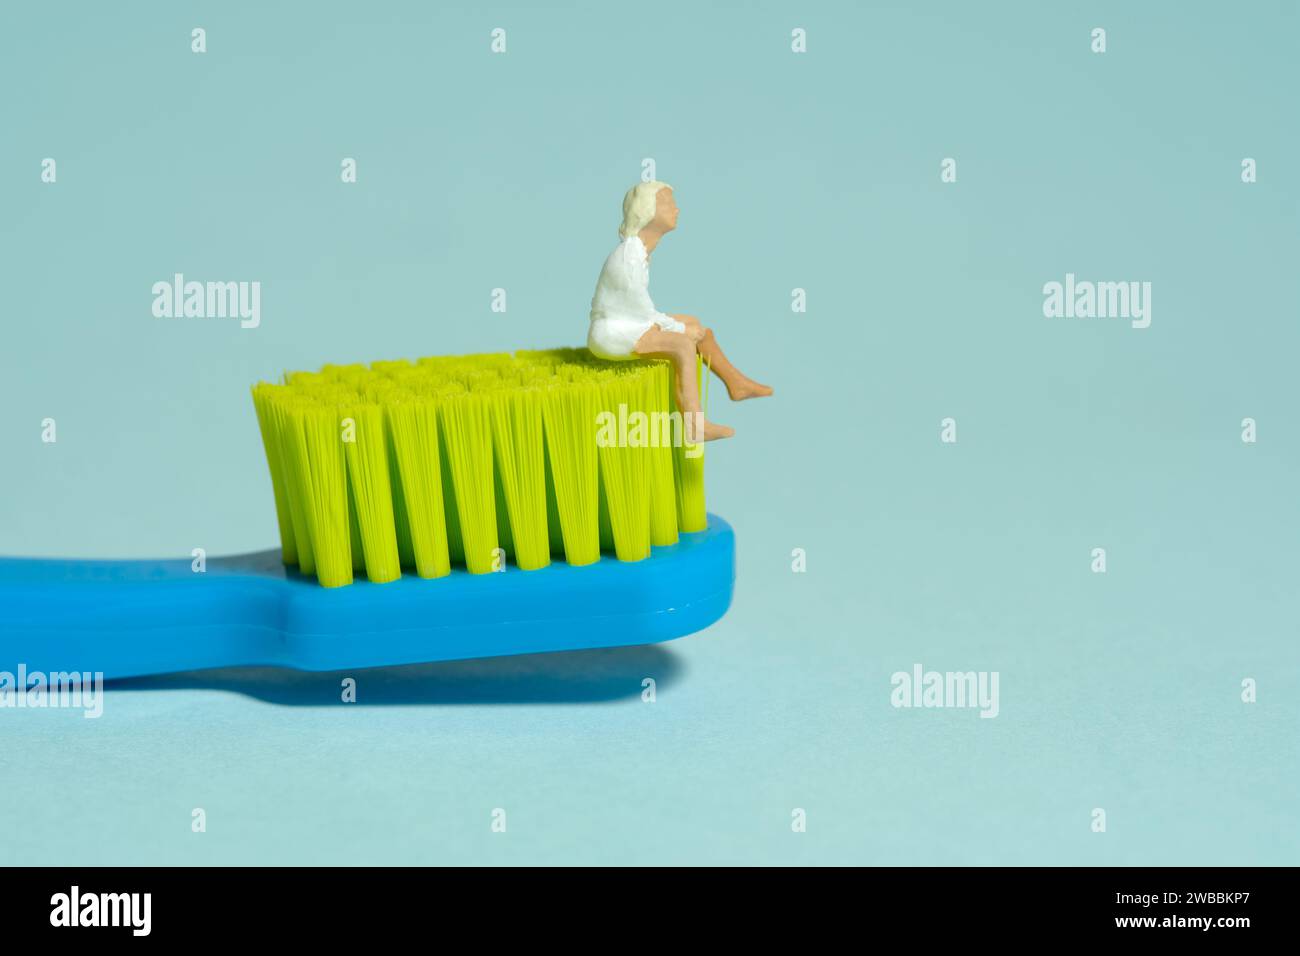 Miniature tiny people toy figure photography. A girl teenager sitting above toothbrush. Isolated on blue background. Image photo Stock Photo